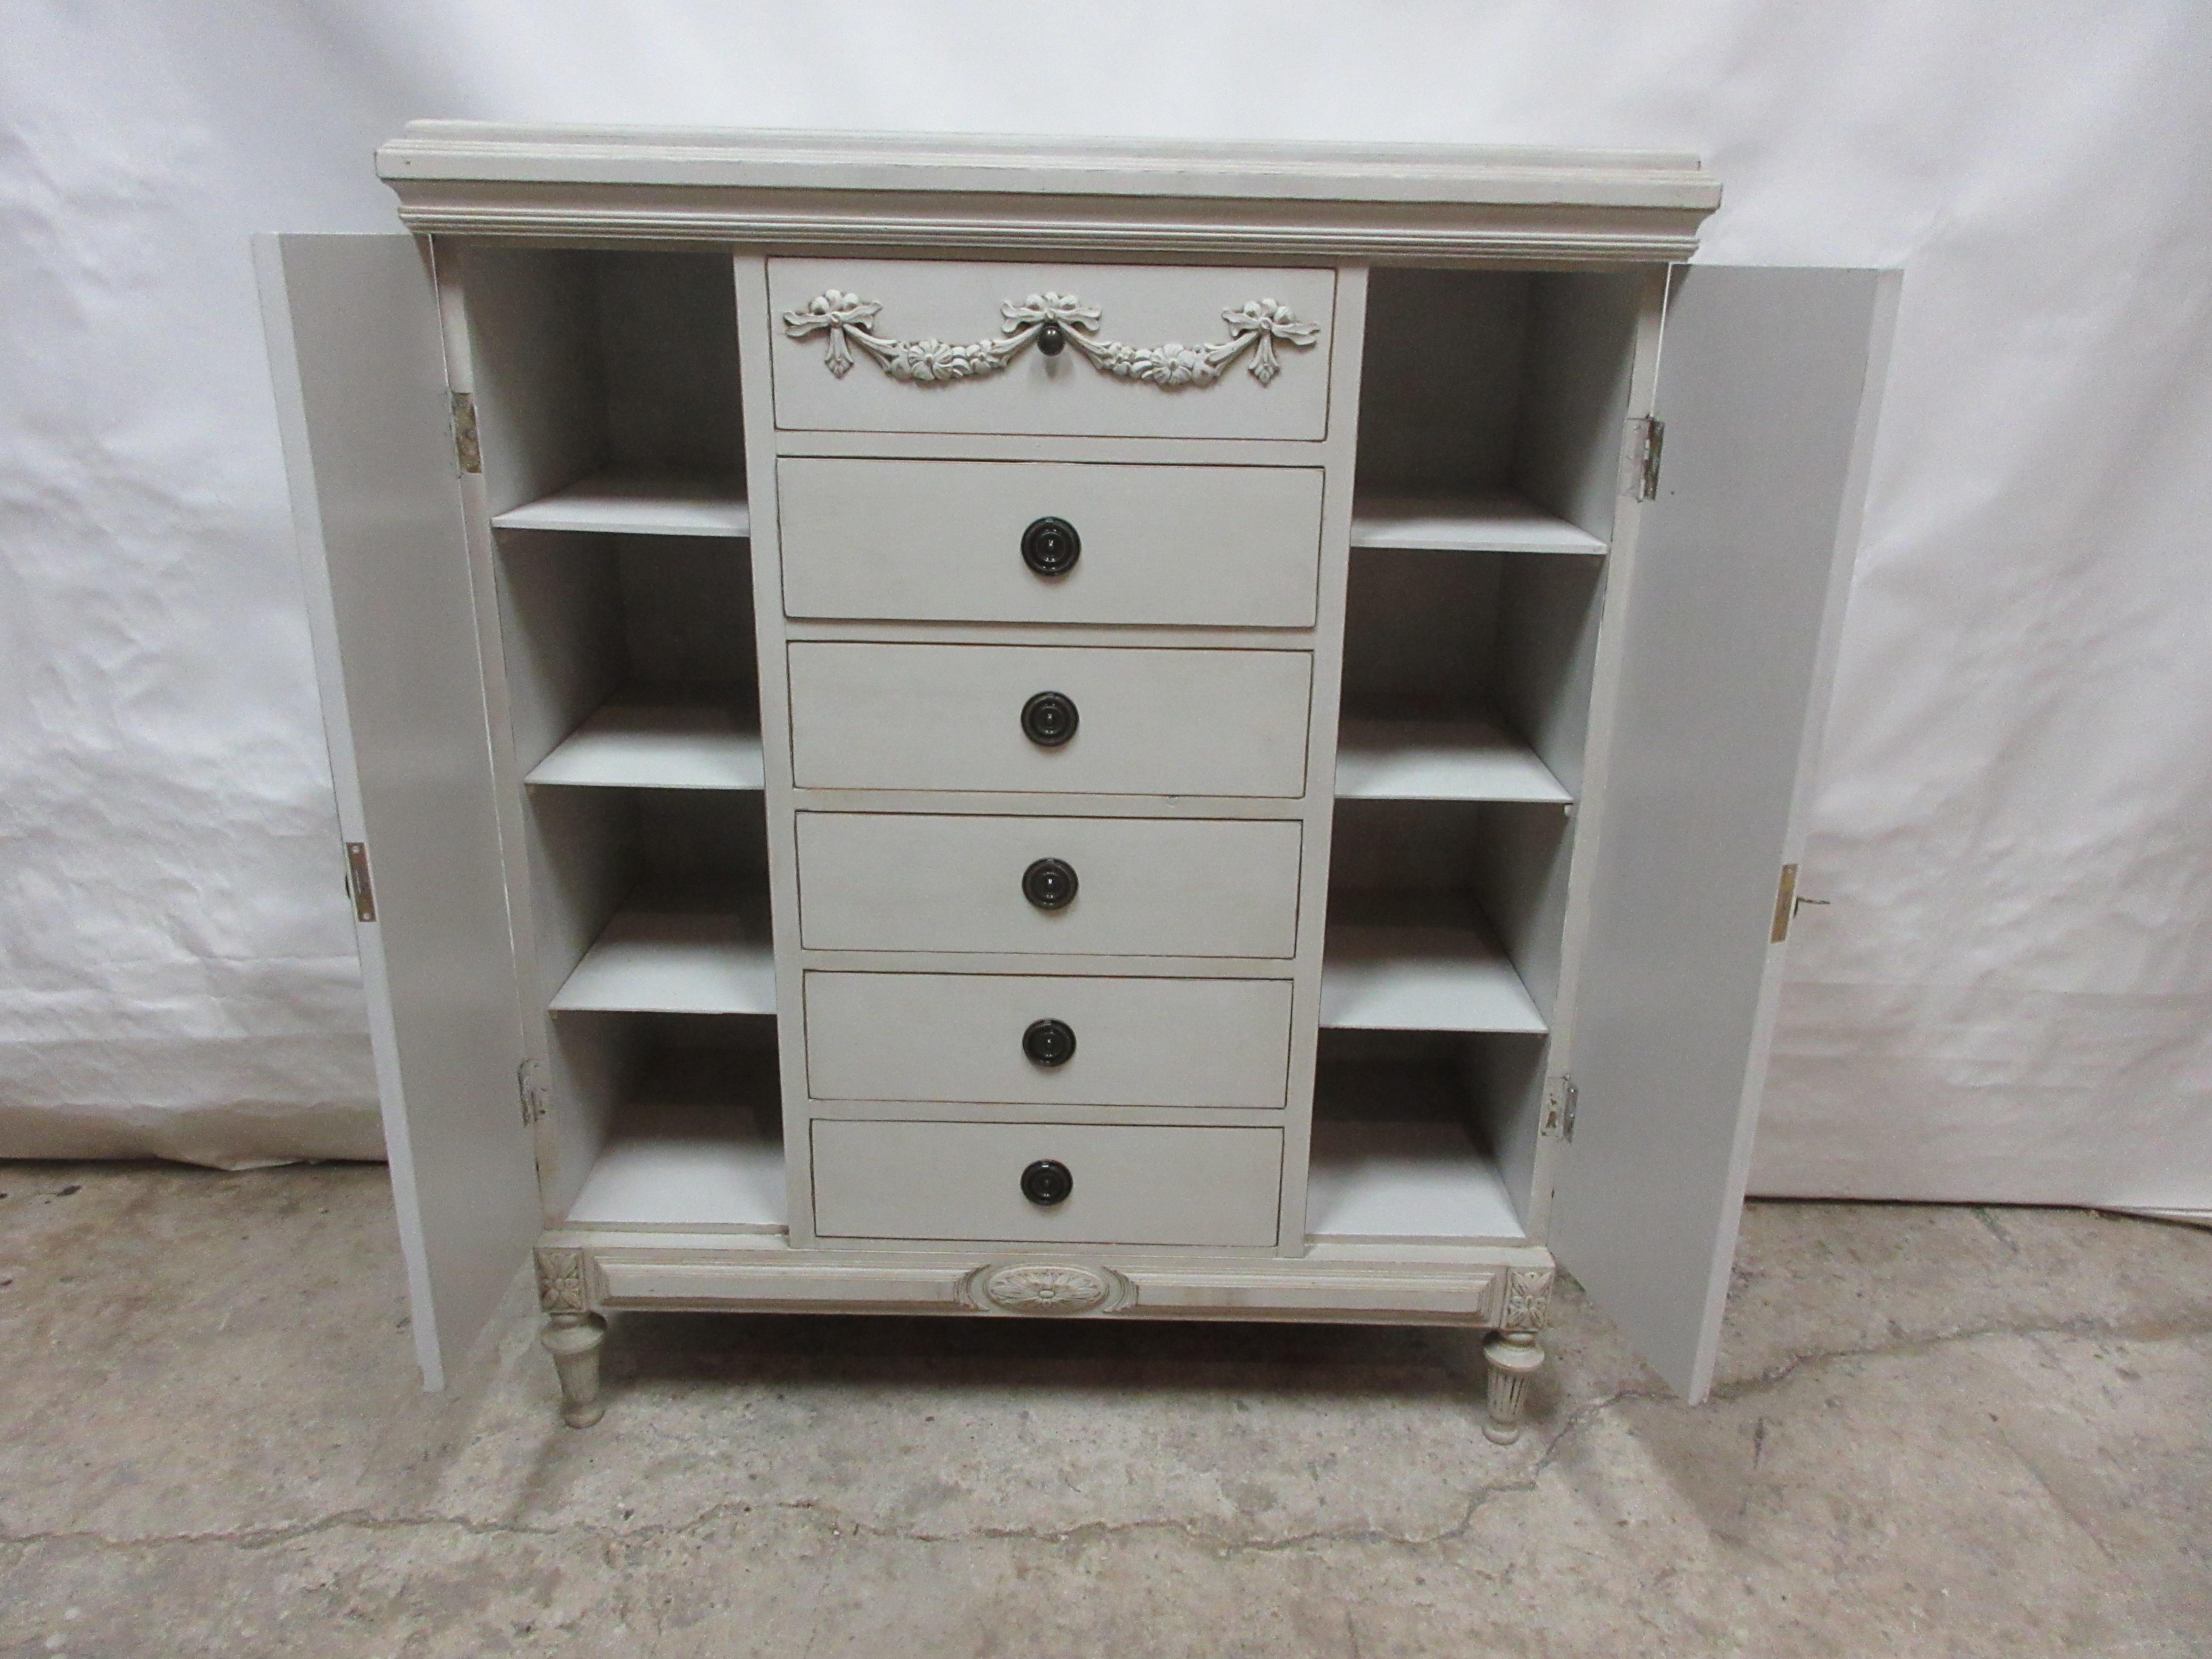 This Swedish Gustavian tall chest cabinet was found at an Estate auction in Stockholm Sweden. Its been restored and =repainted with Milk Paints 